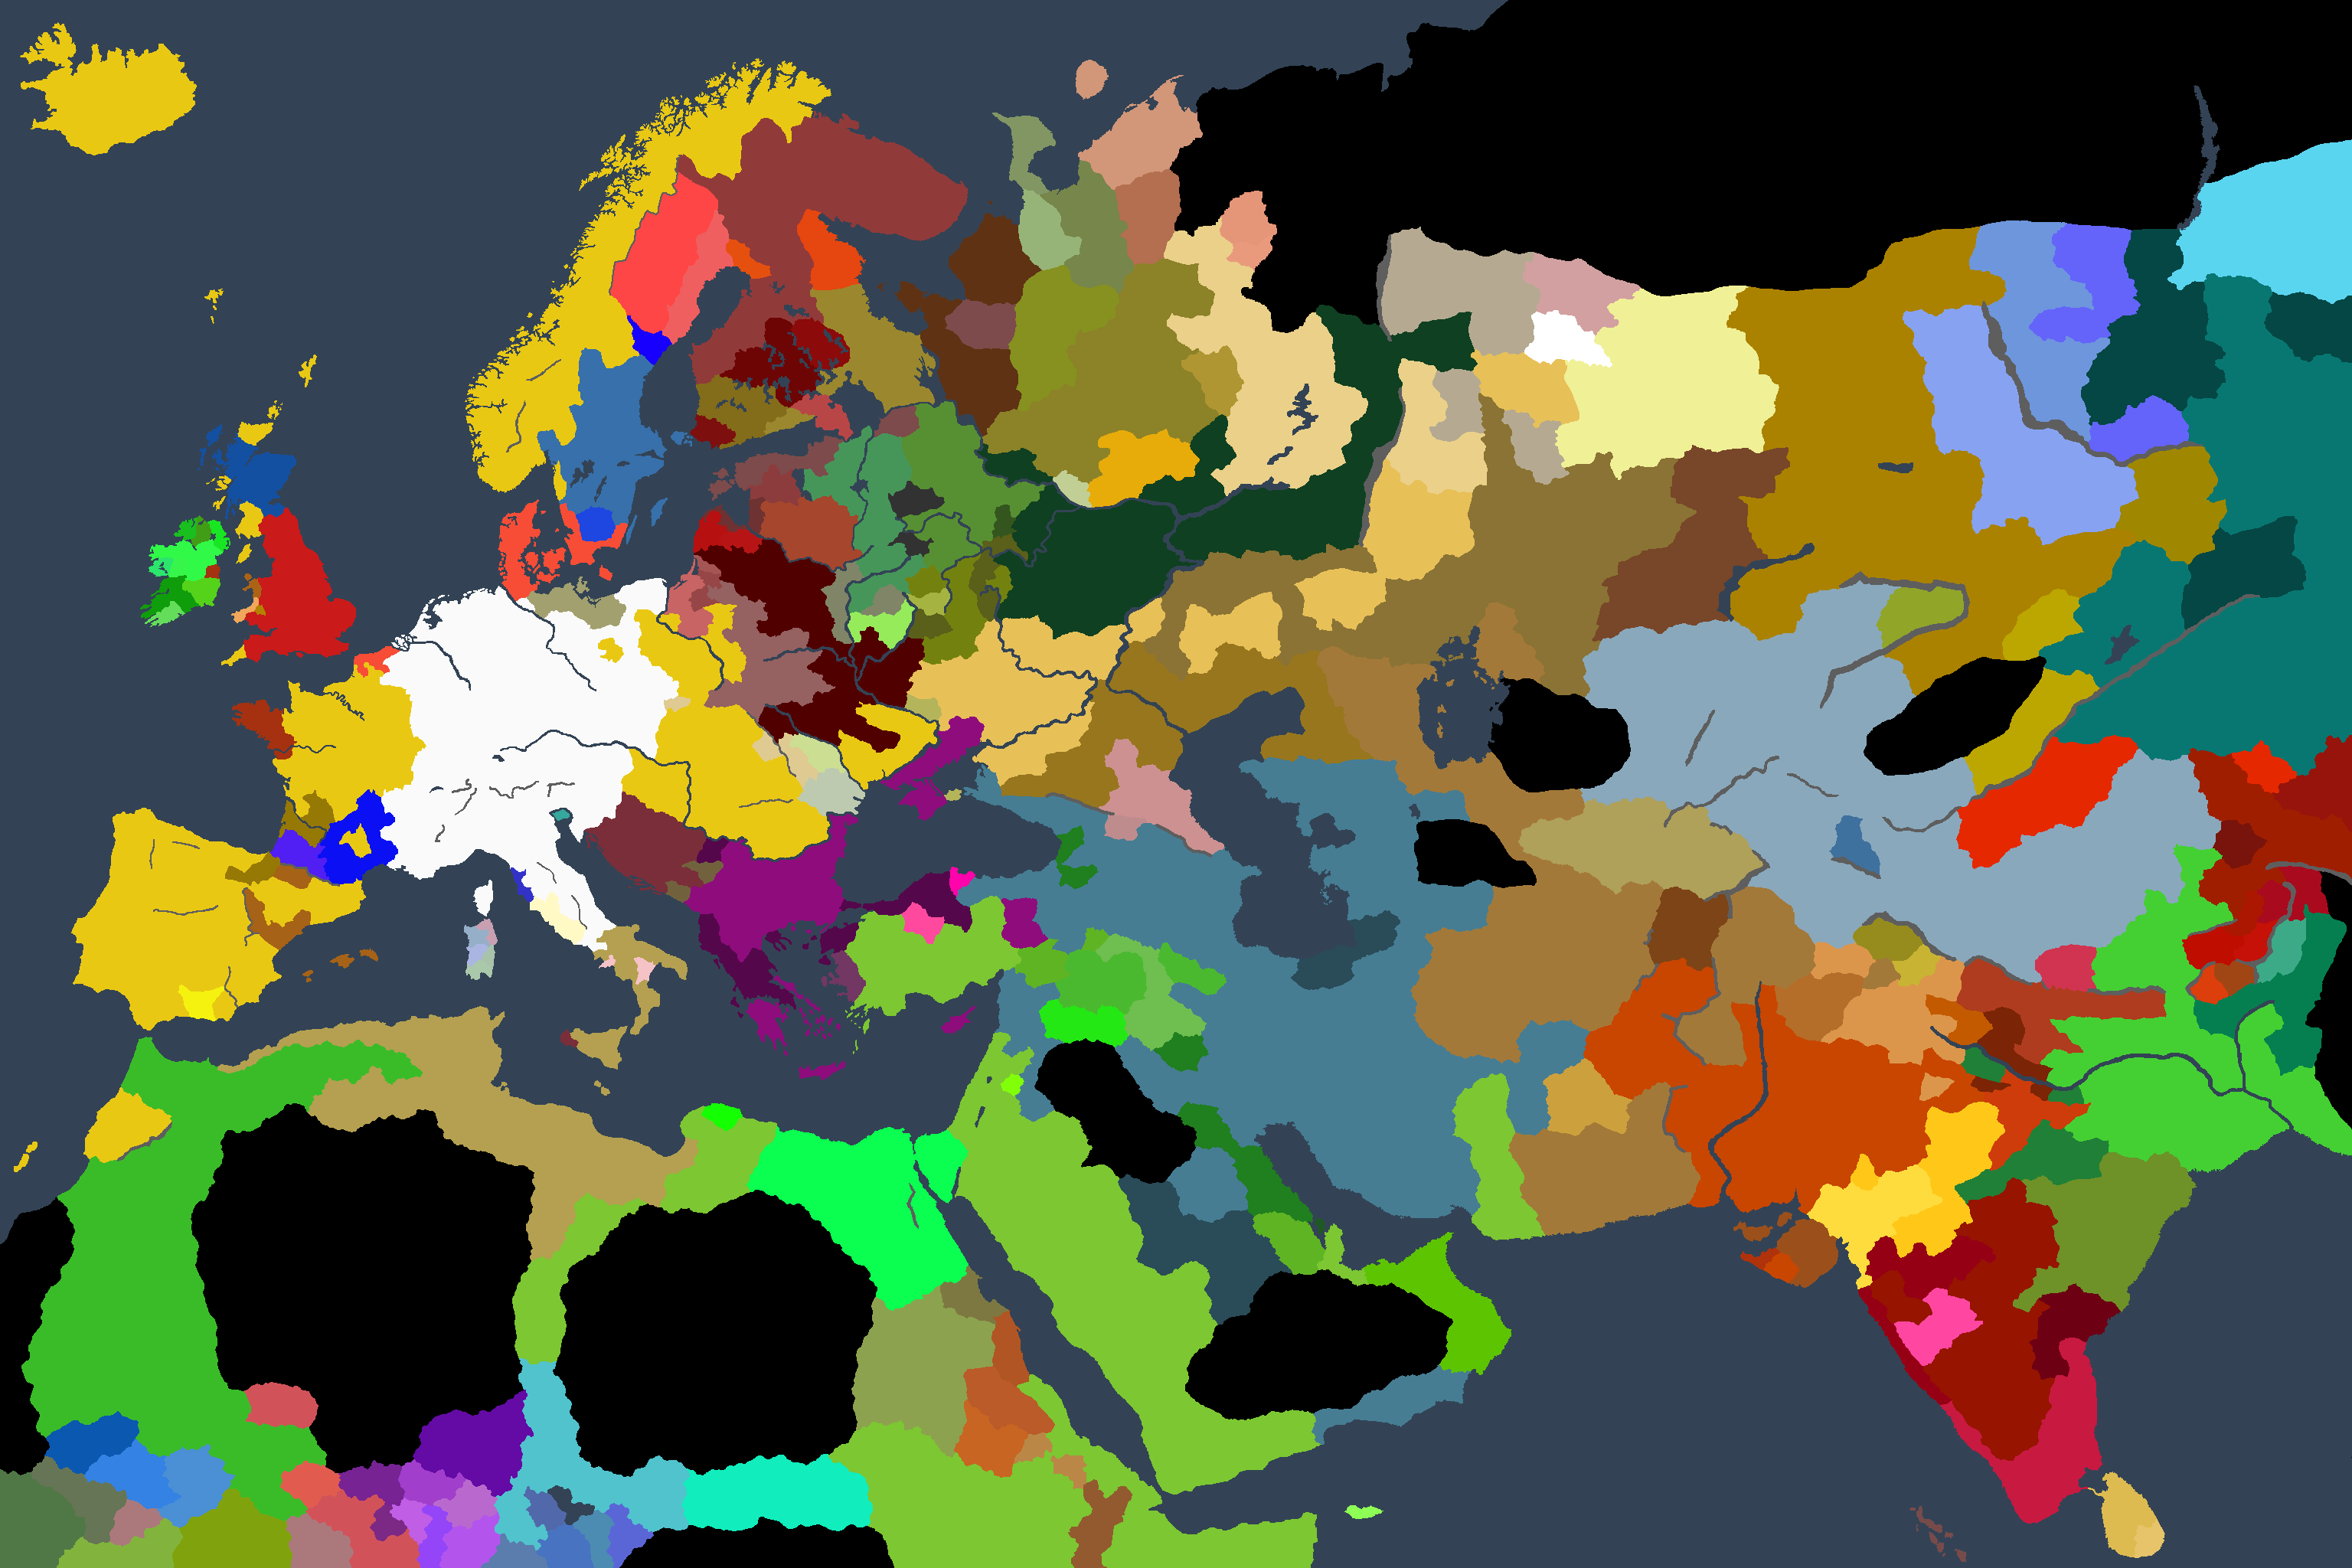 ck2_map_1.png